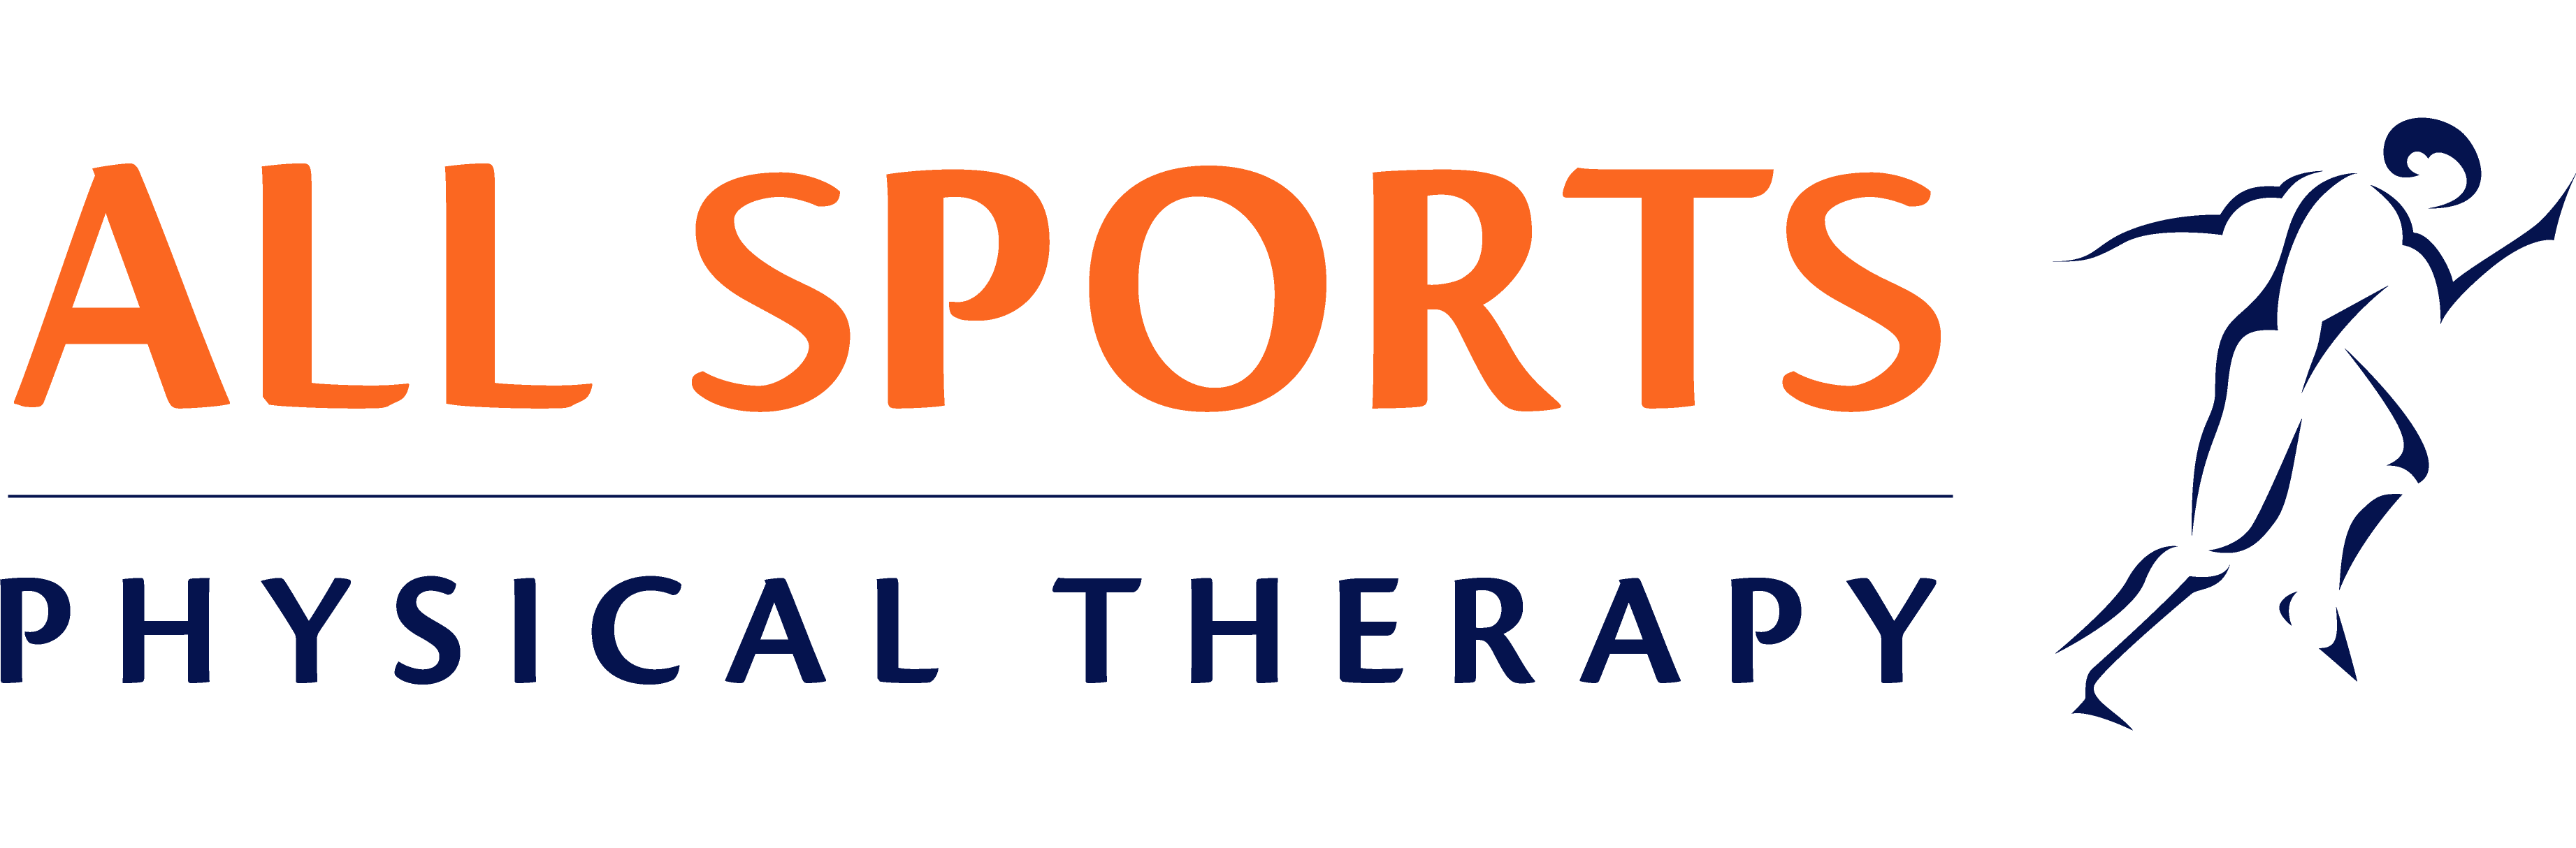 All Sports Physical Therapy